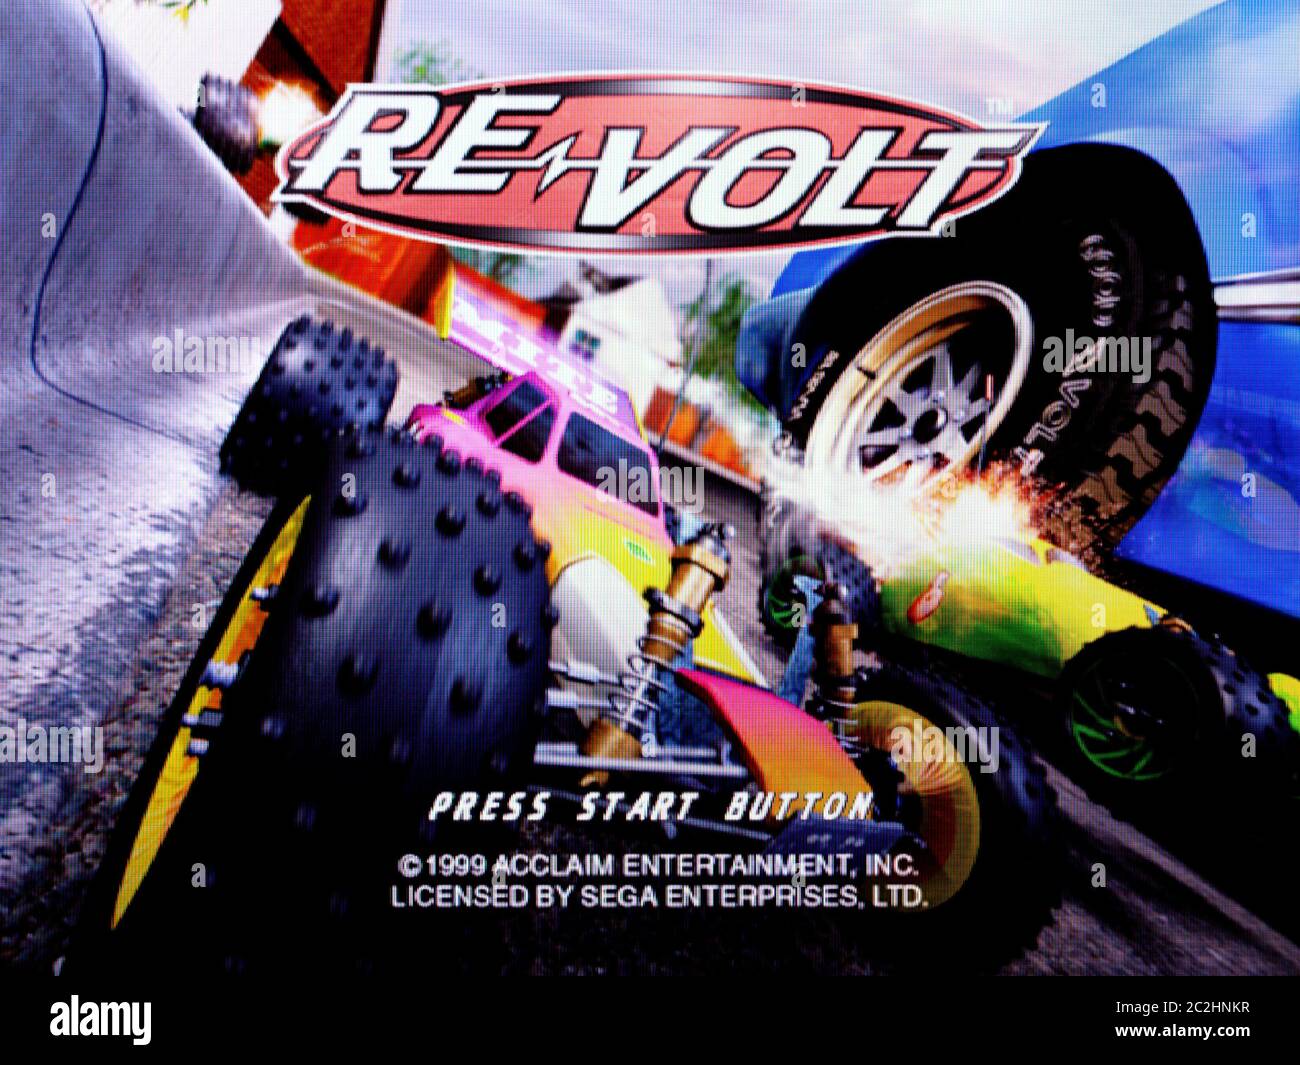 Re-Volt - Sega Dreamcast Videogame - Editorial use only Stock Photo